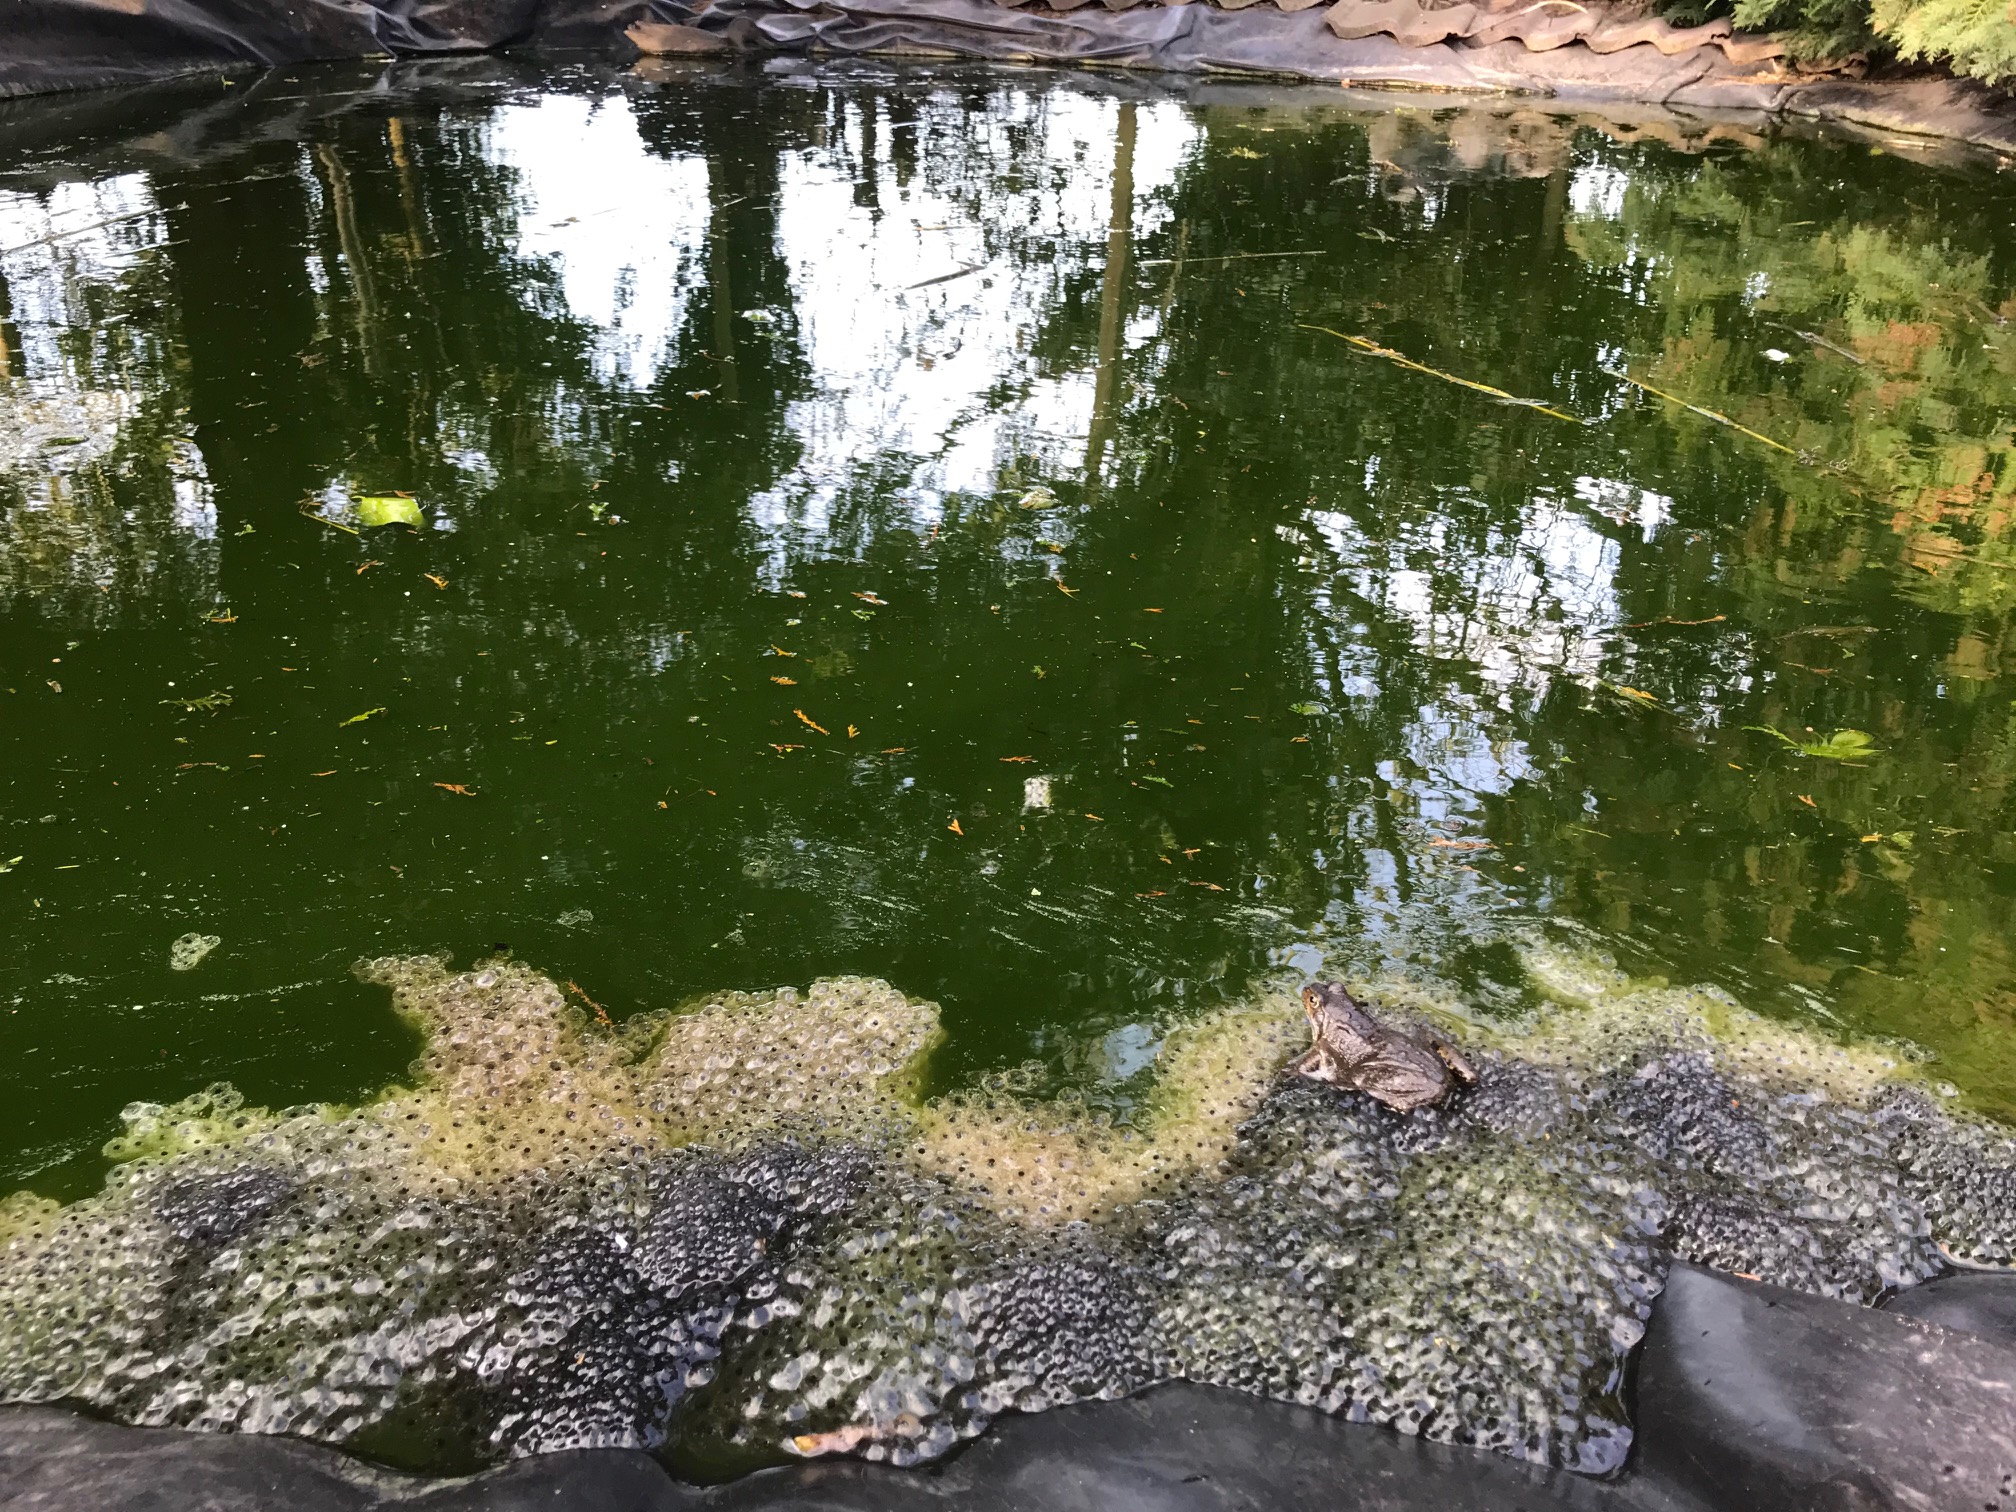 Frogs Spawn